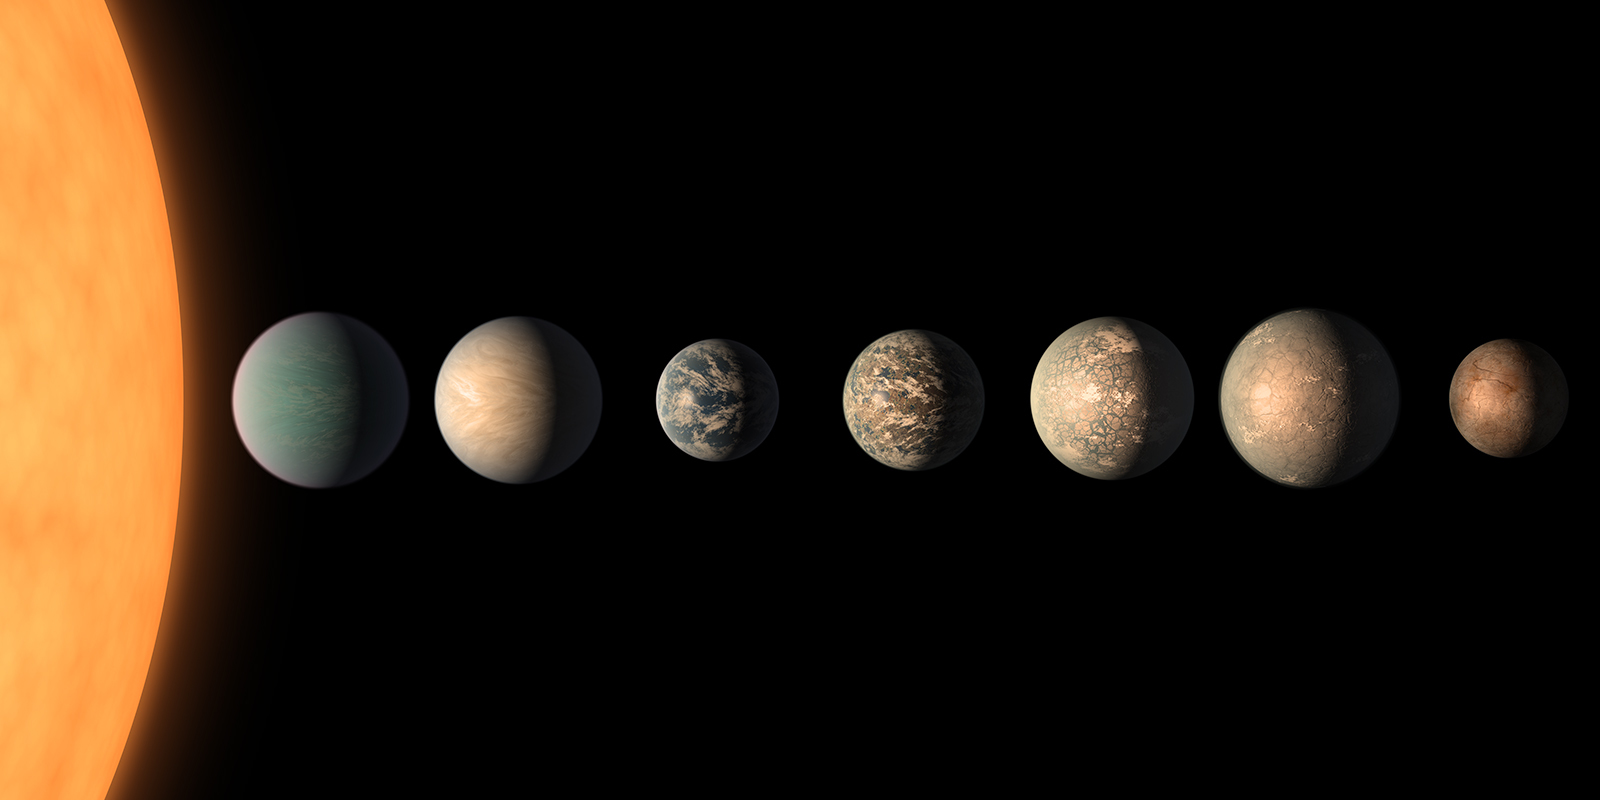 NASA Credit: This artist's concept shows what the TRAPPIST-1 planetary system may look like, based on available data about the planets' diameters, masses and distances from the host star, as of February 2018. Credit: NASA/JPL-Caltech]